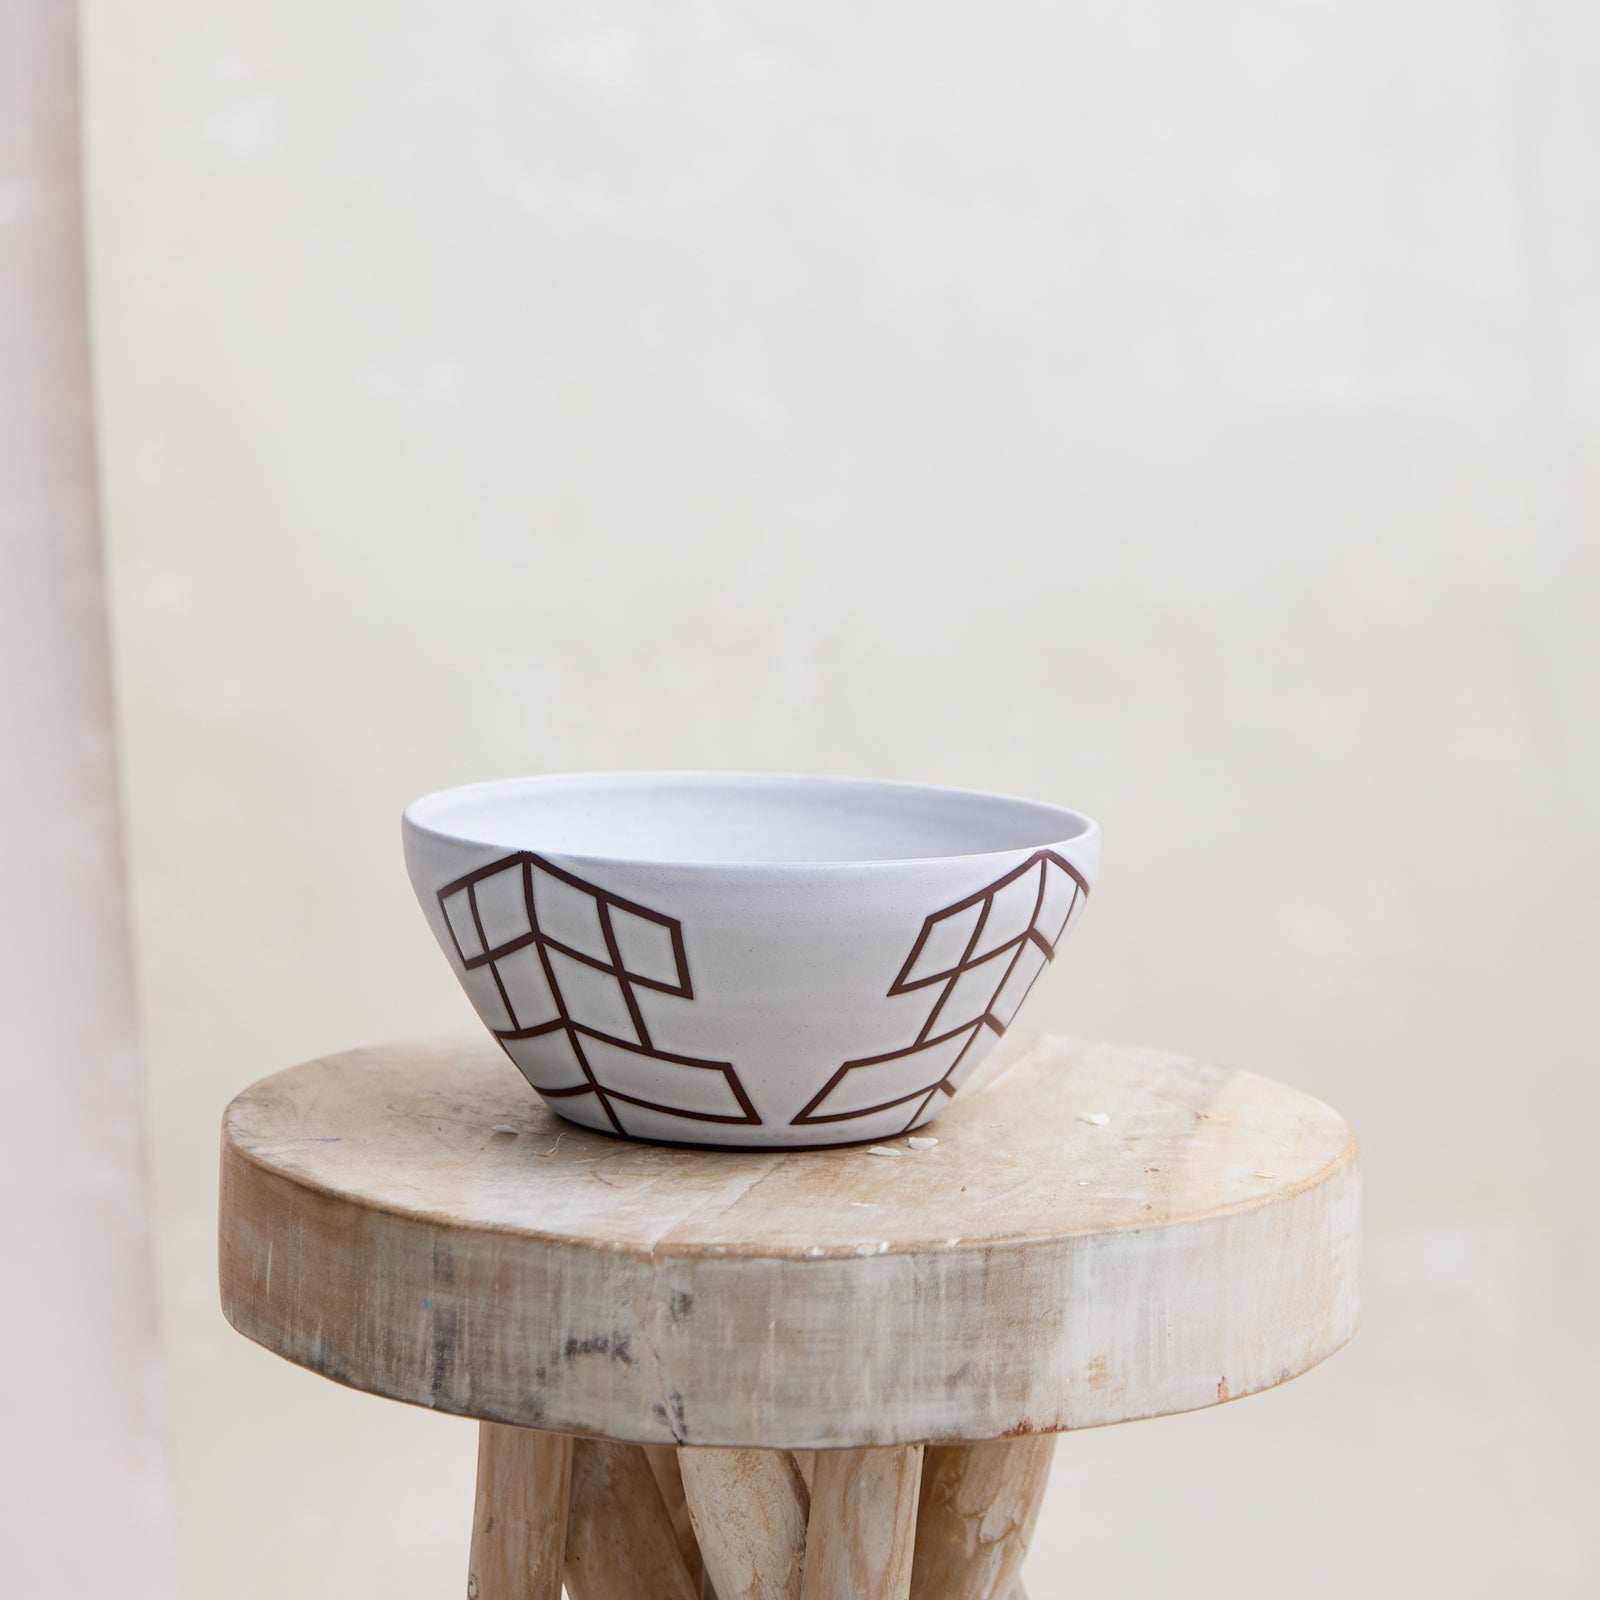 A front view of the 'Geometric Handmade Ceramic Bowl' with a white glaze and mahogany clay. The handmade ceramic bowl sits on a wooden stool in a coastal-styled setting.